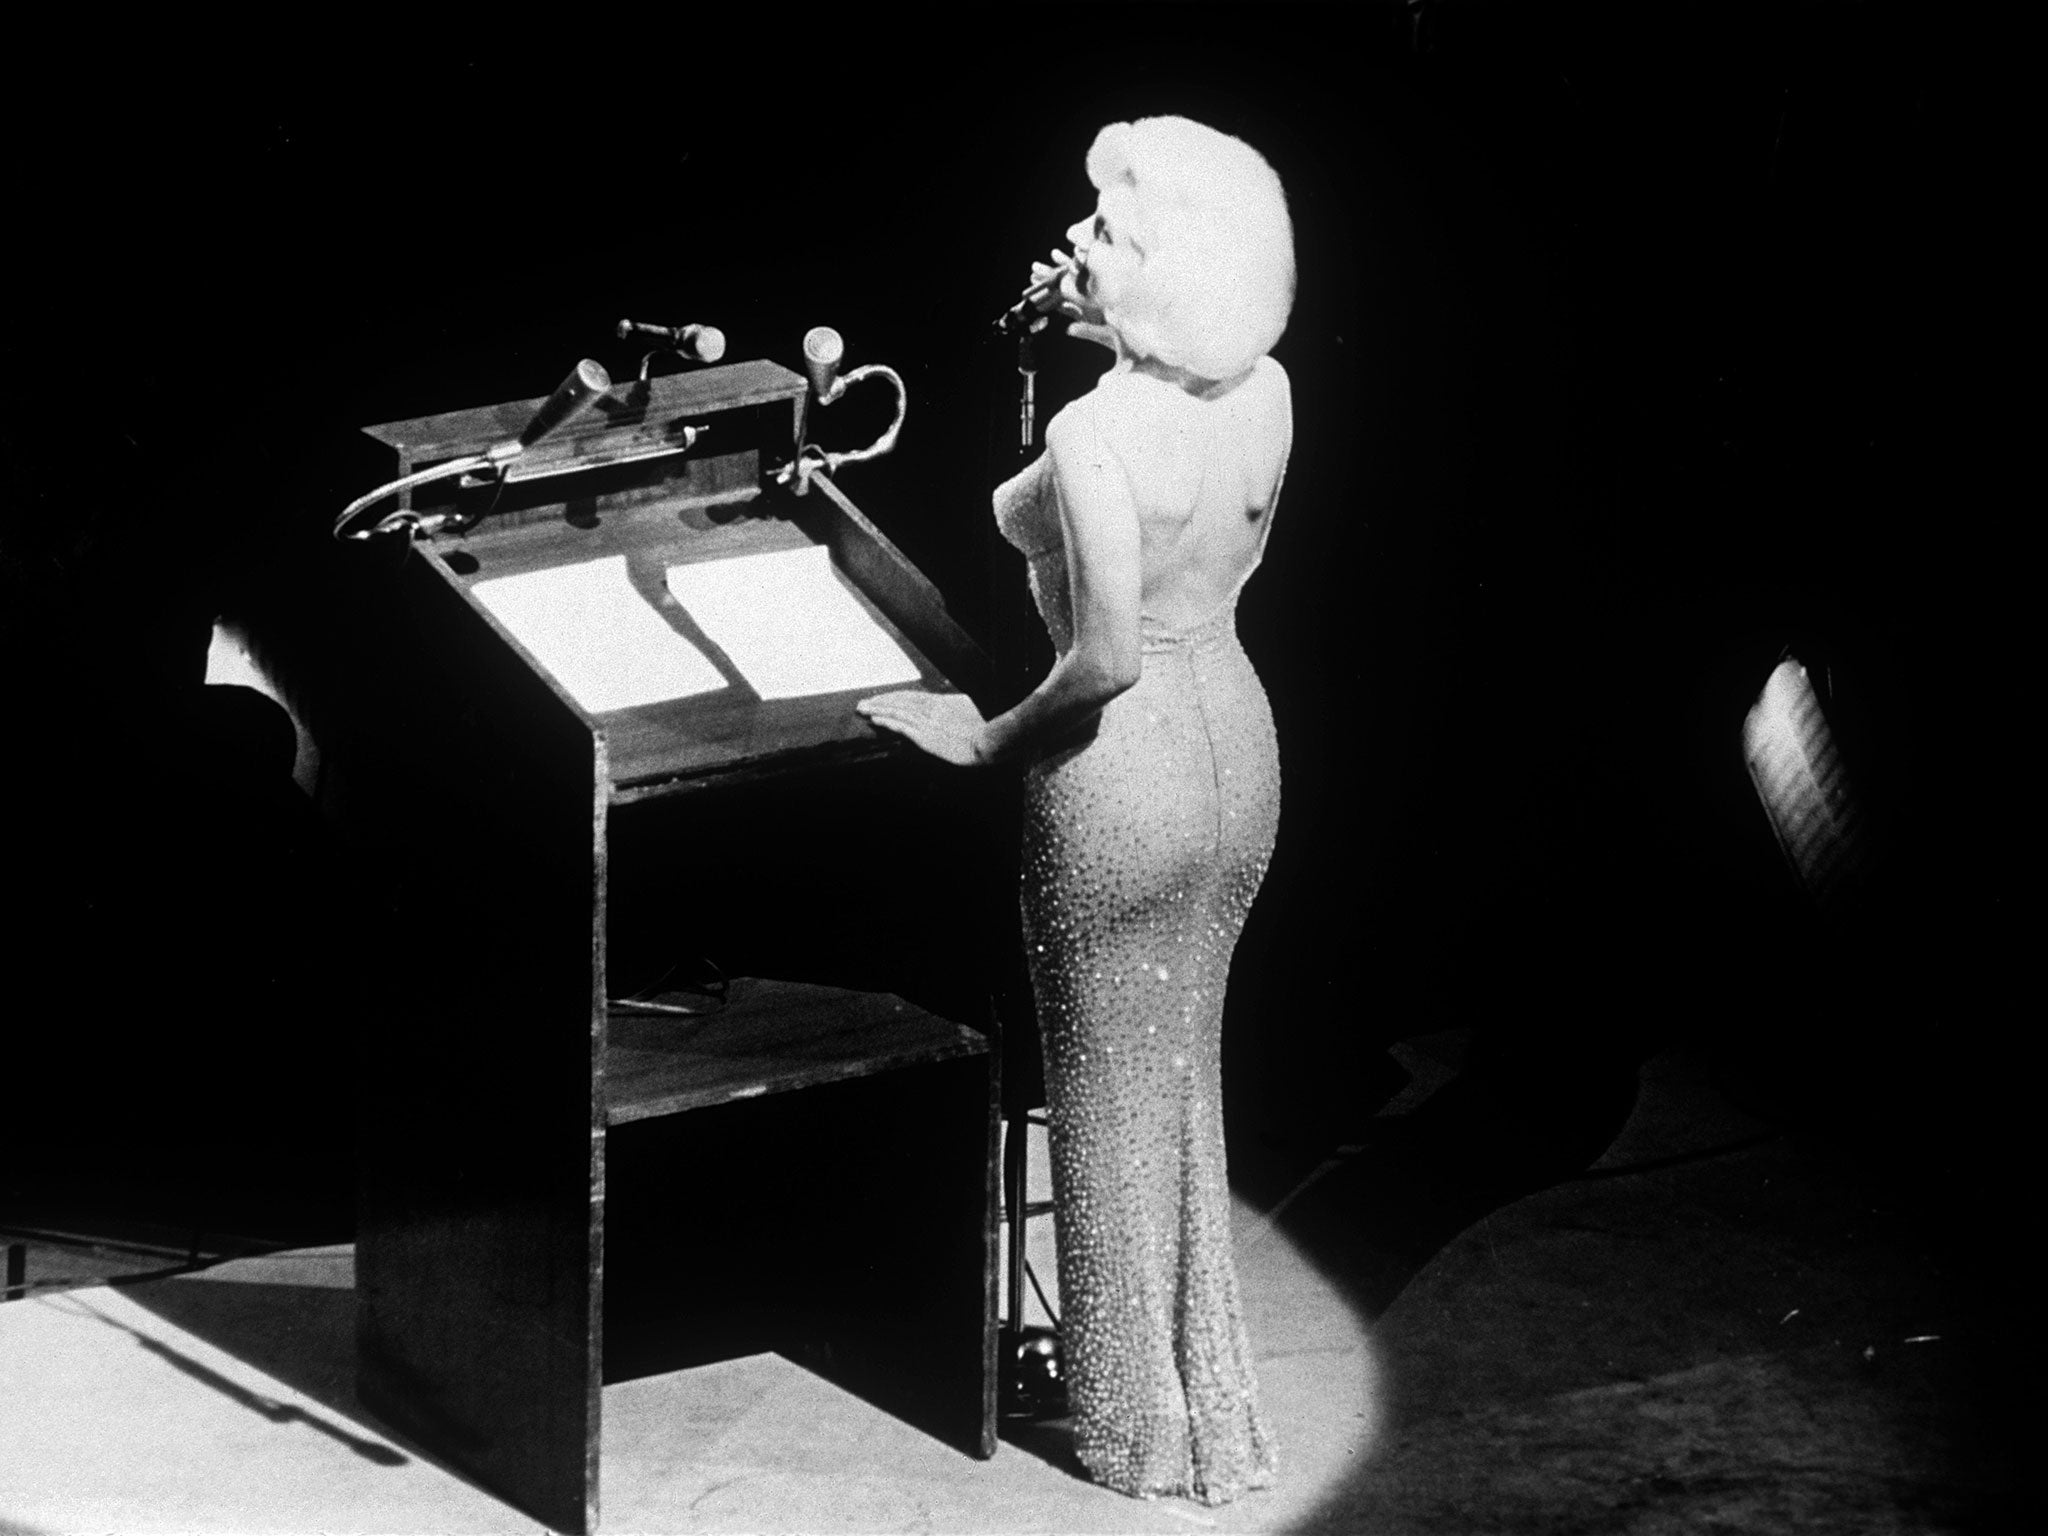 Marilyn Monroe sings "Happy Birthday" during a celebration in New York's Madison Square Garden on May 19, 1962 to mark President John F. Kennedy's upcoming 45th birthday